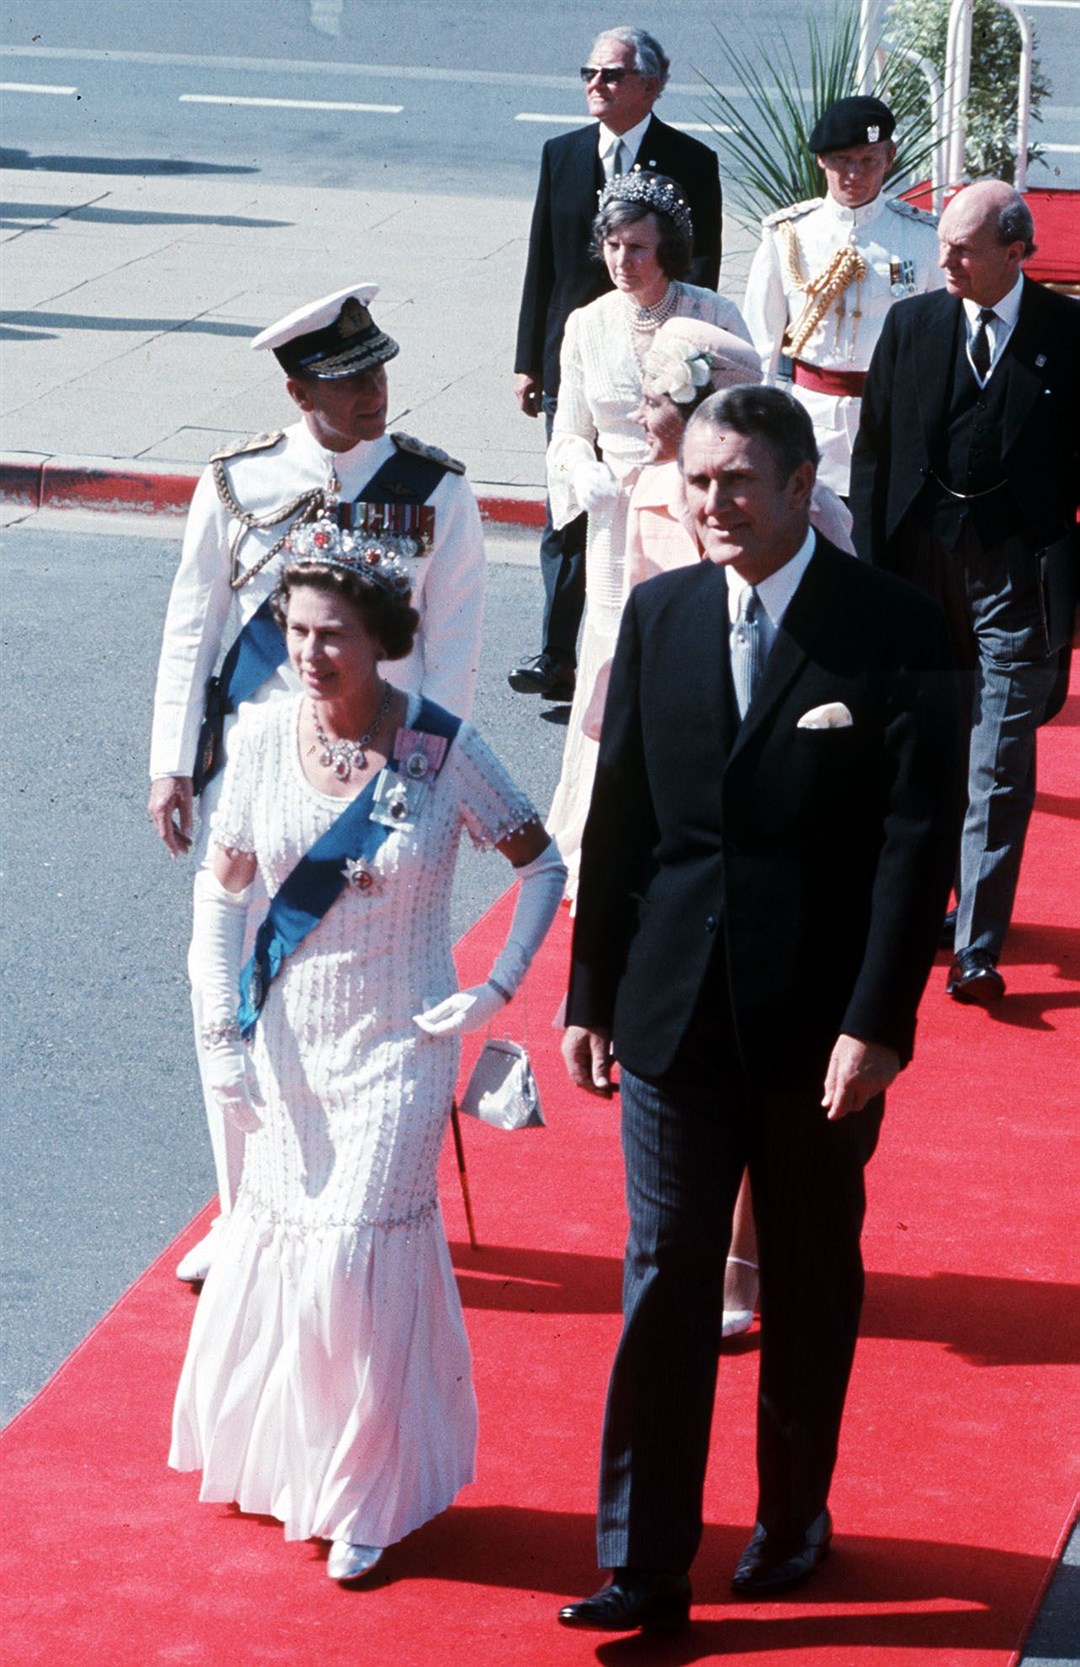 The Queen (followed by the Duke of Edinburgh), is accompanied by then-Australian prime minister Malcolm Fraser during her Silver Jubilee visit to Australia (Ron Bell/PA)